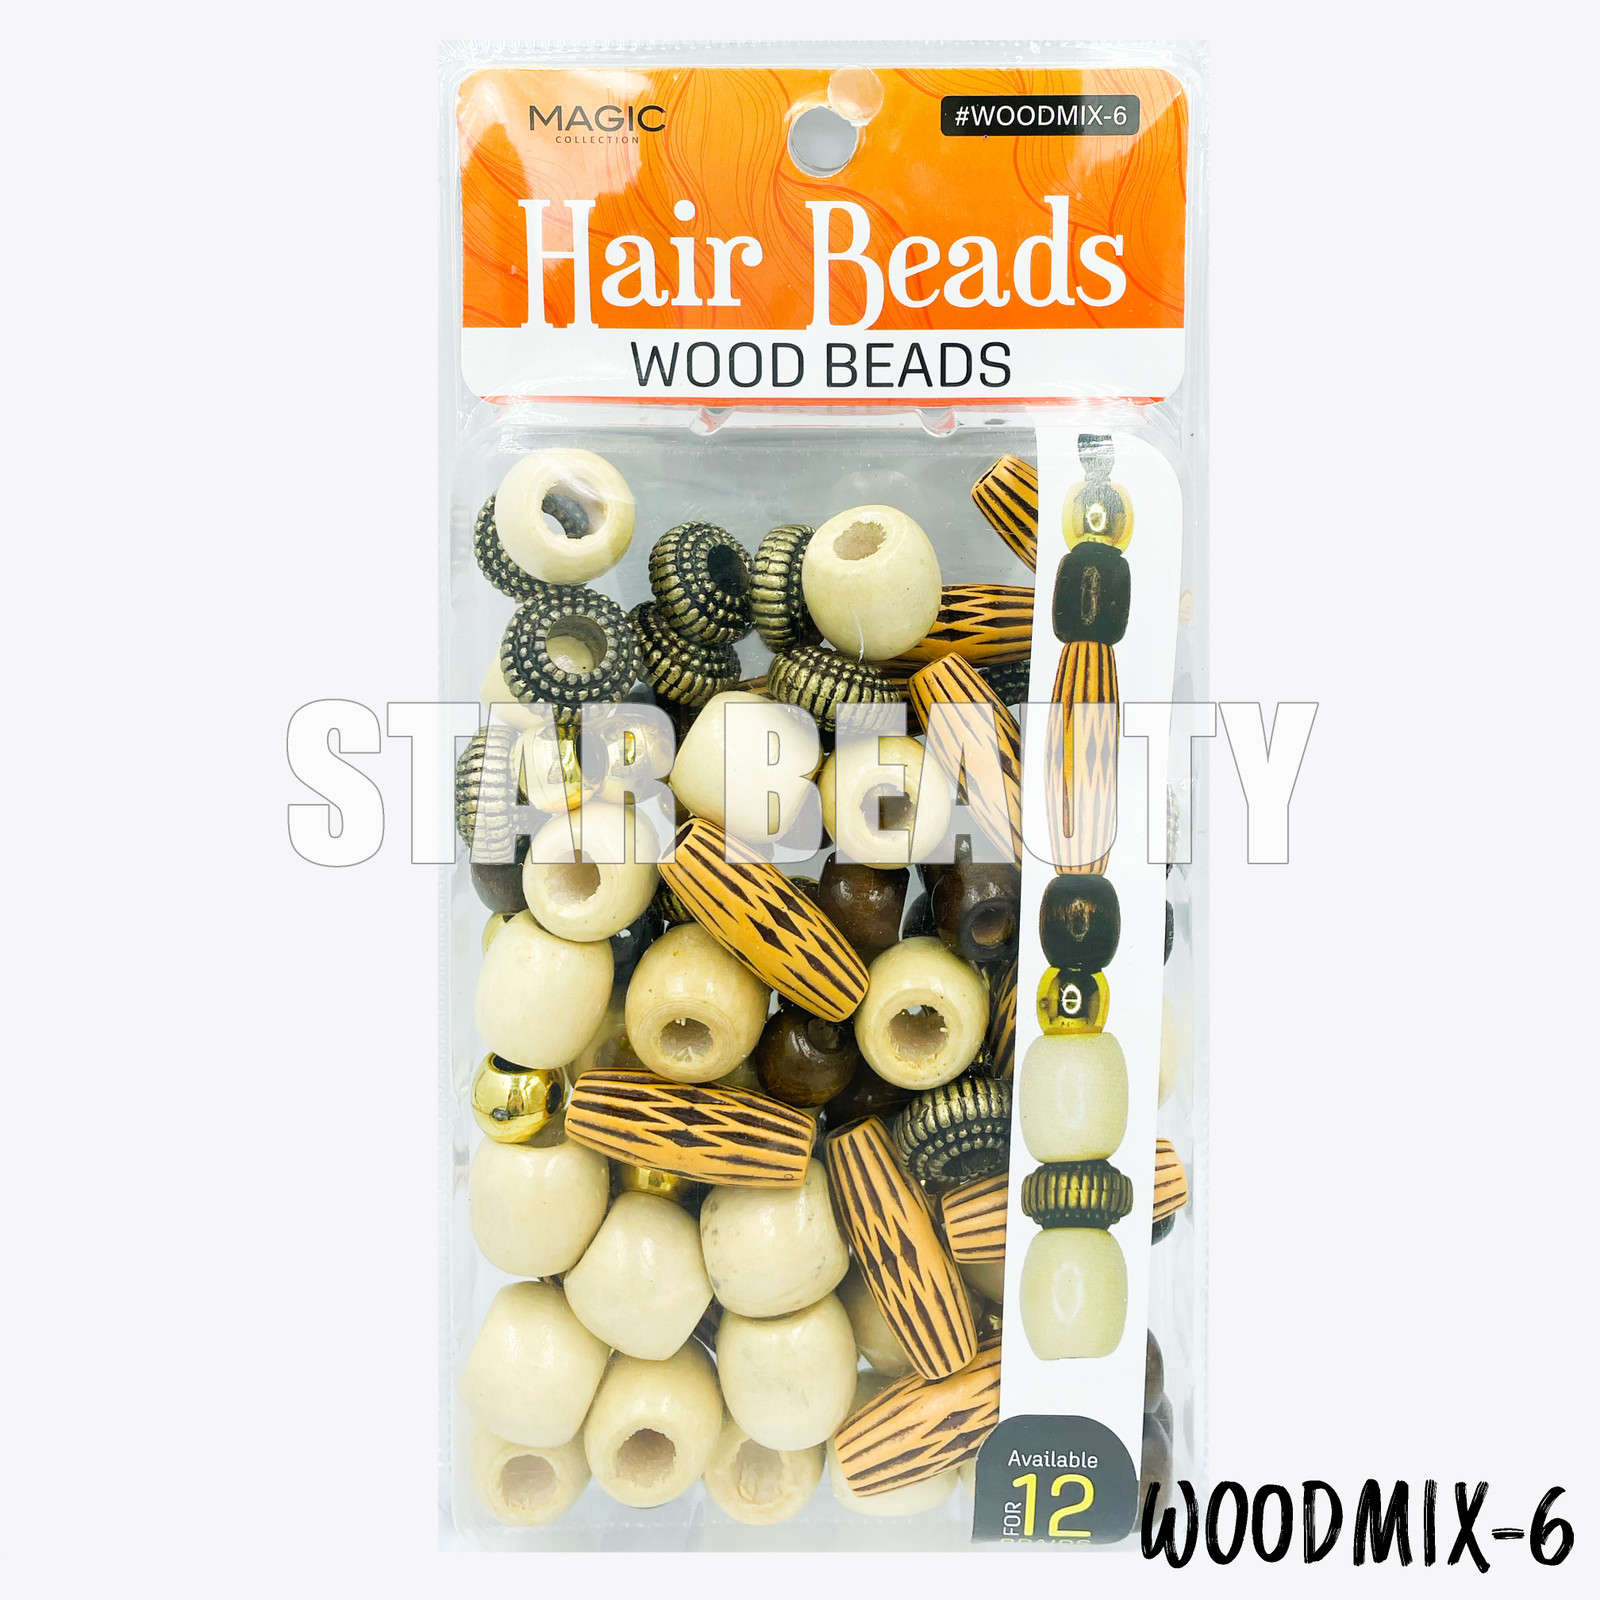 Magic Collection - Wood Hair Beads WOODMIX-5